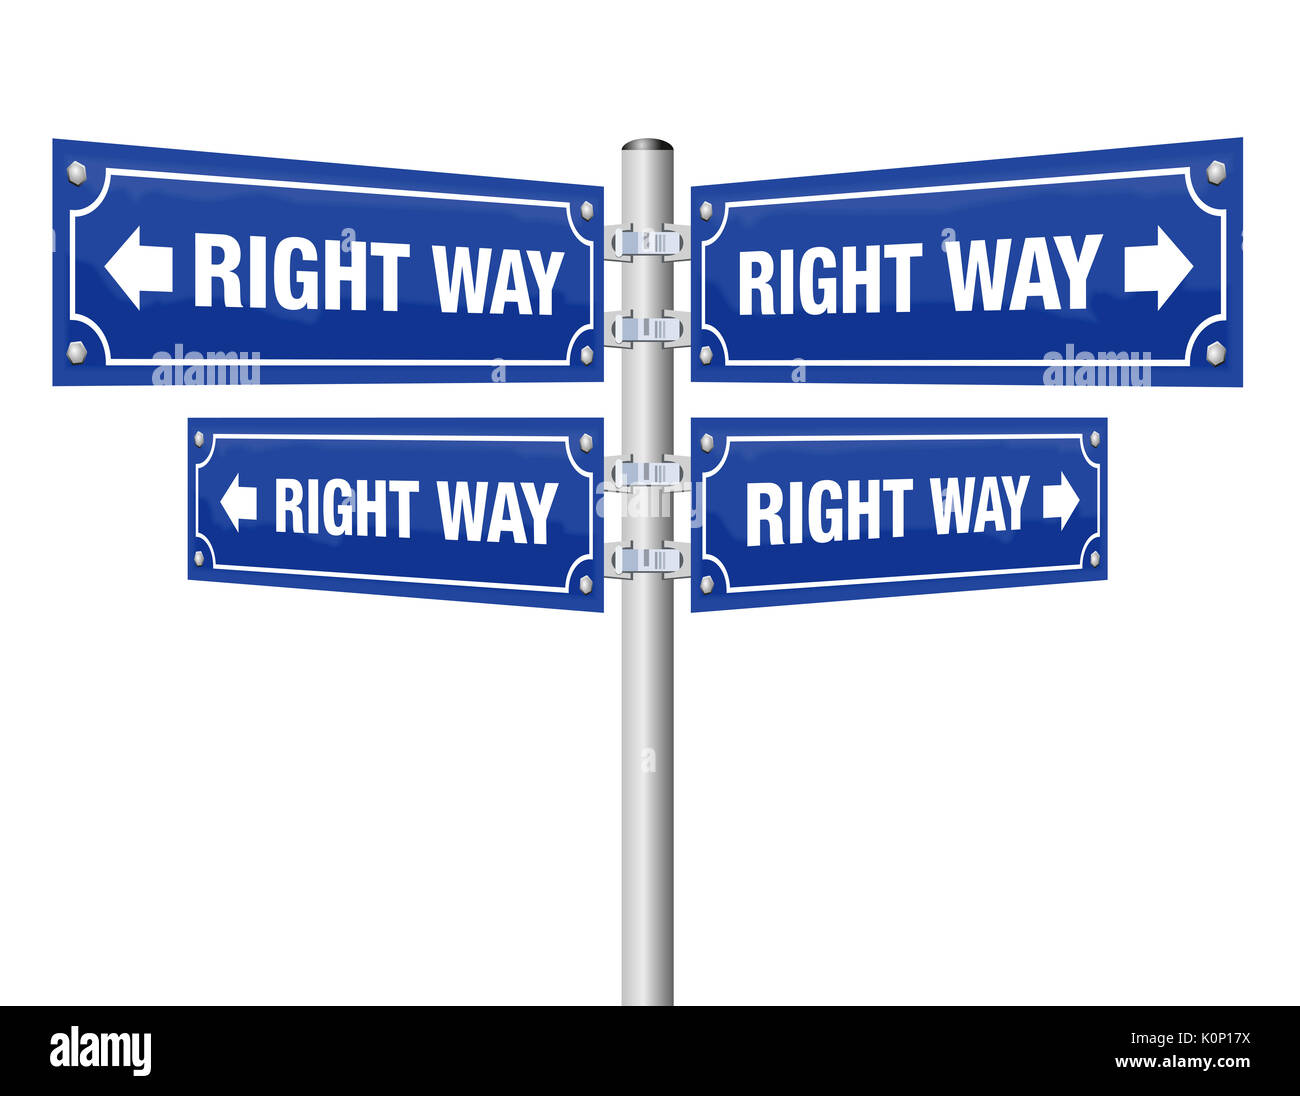 Right way guidepost showing in four different directions that lead always to the desired result as a symbol for confidence, optimism, trust, assurance Stock Photo